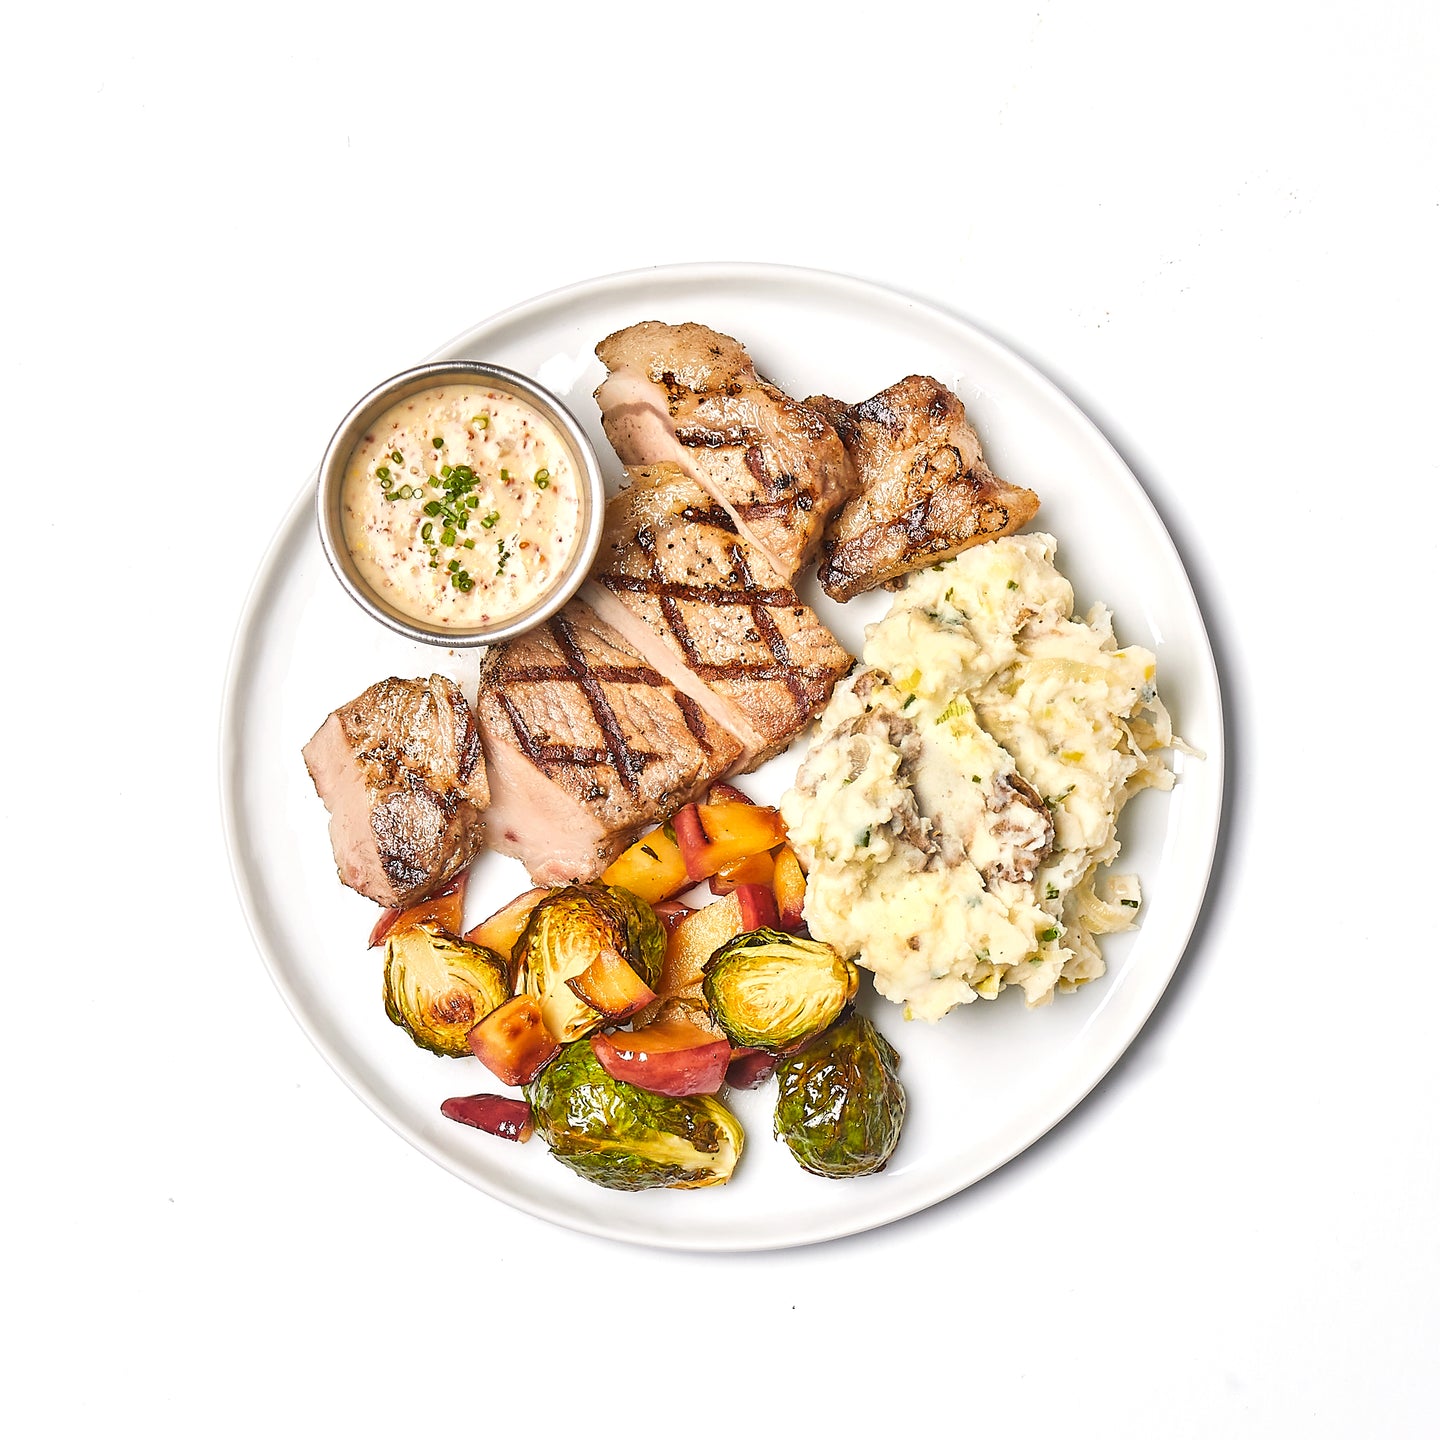 grilled pork chop azuluna foods Premium Pasture-Raised ready-to-eat Meals Delivery